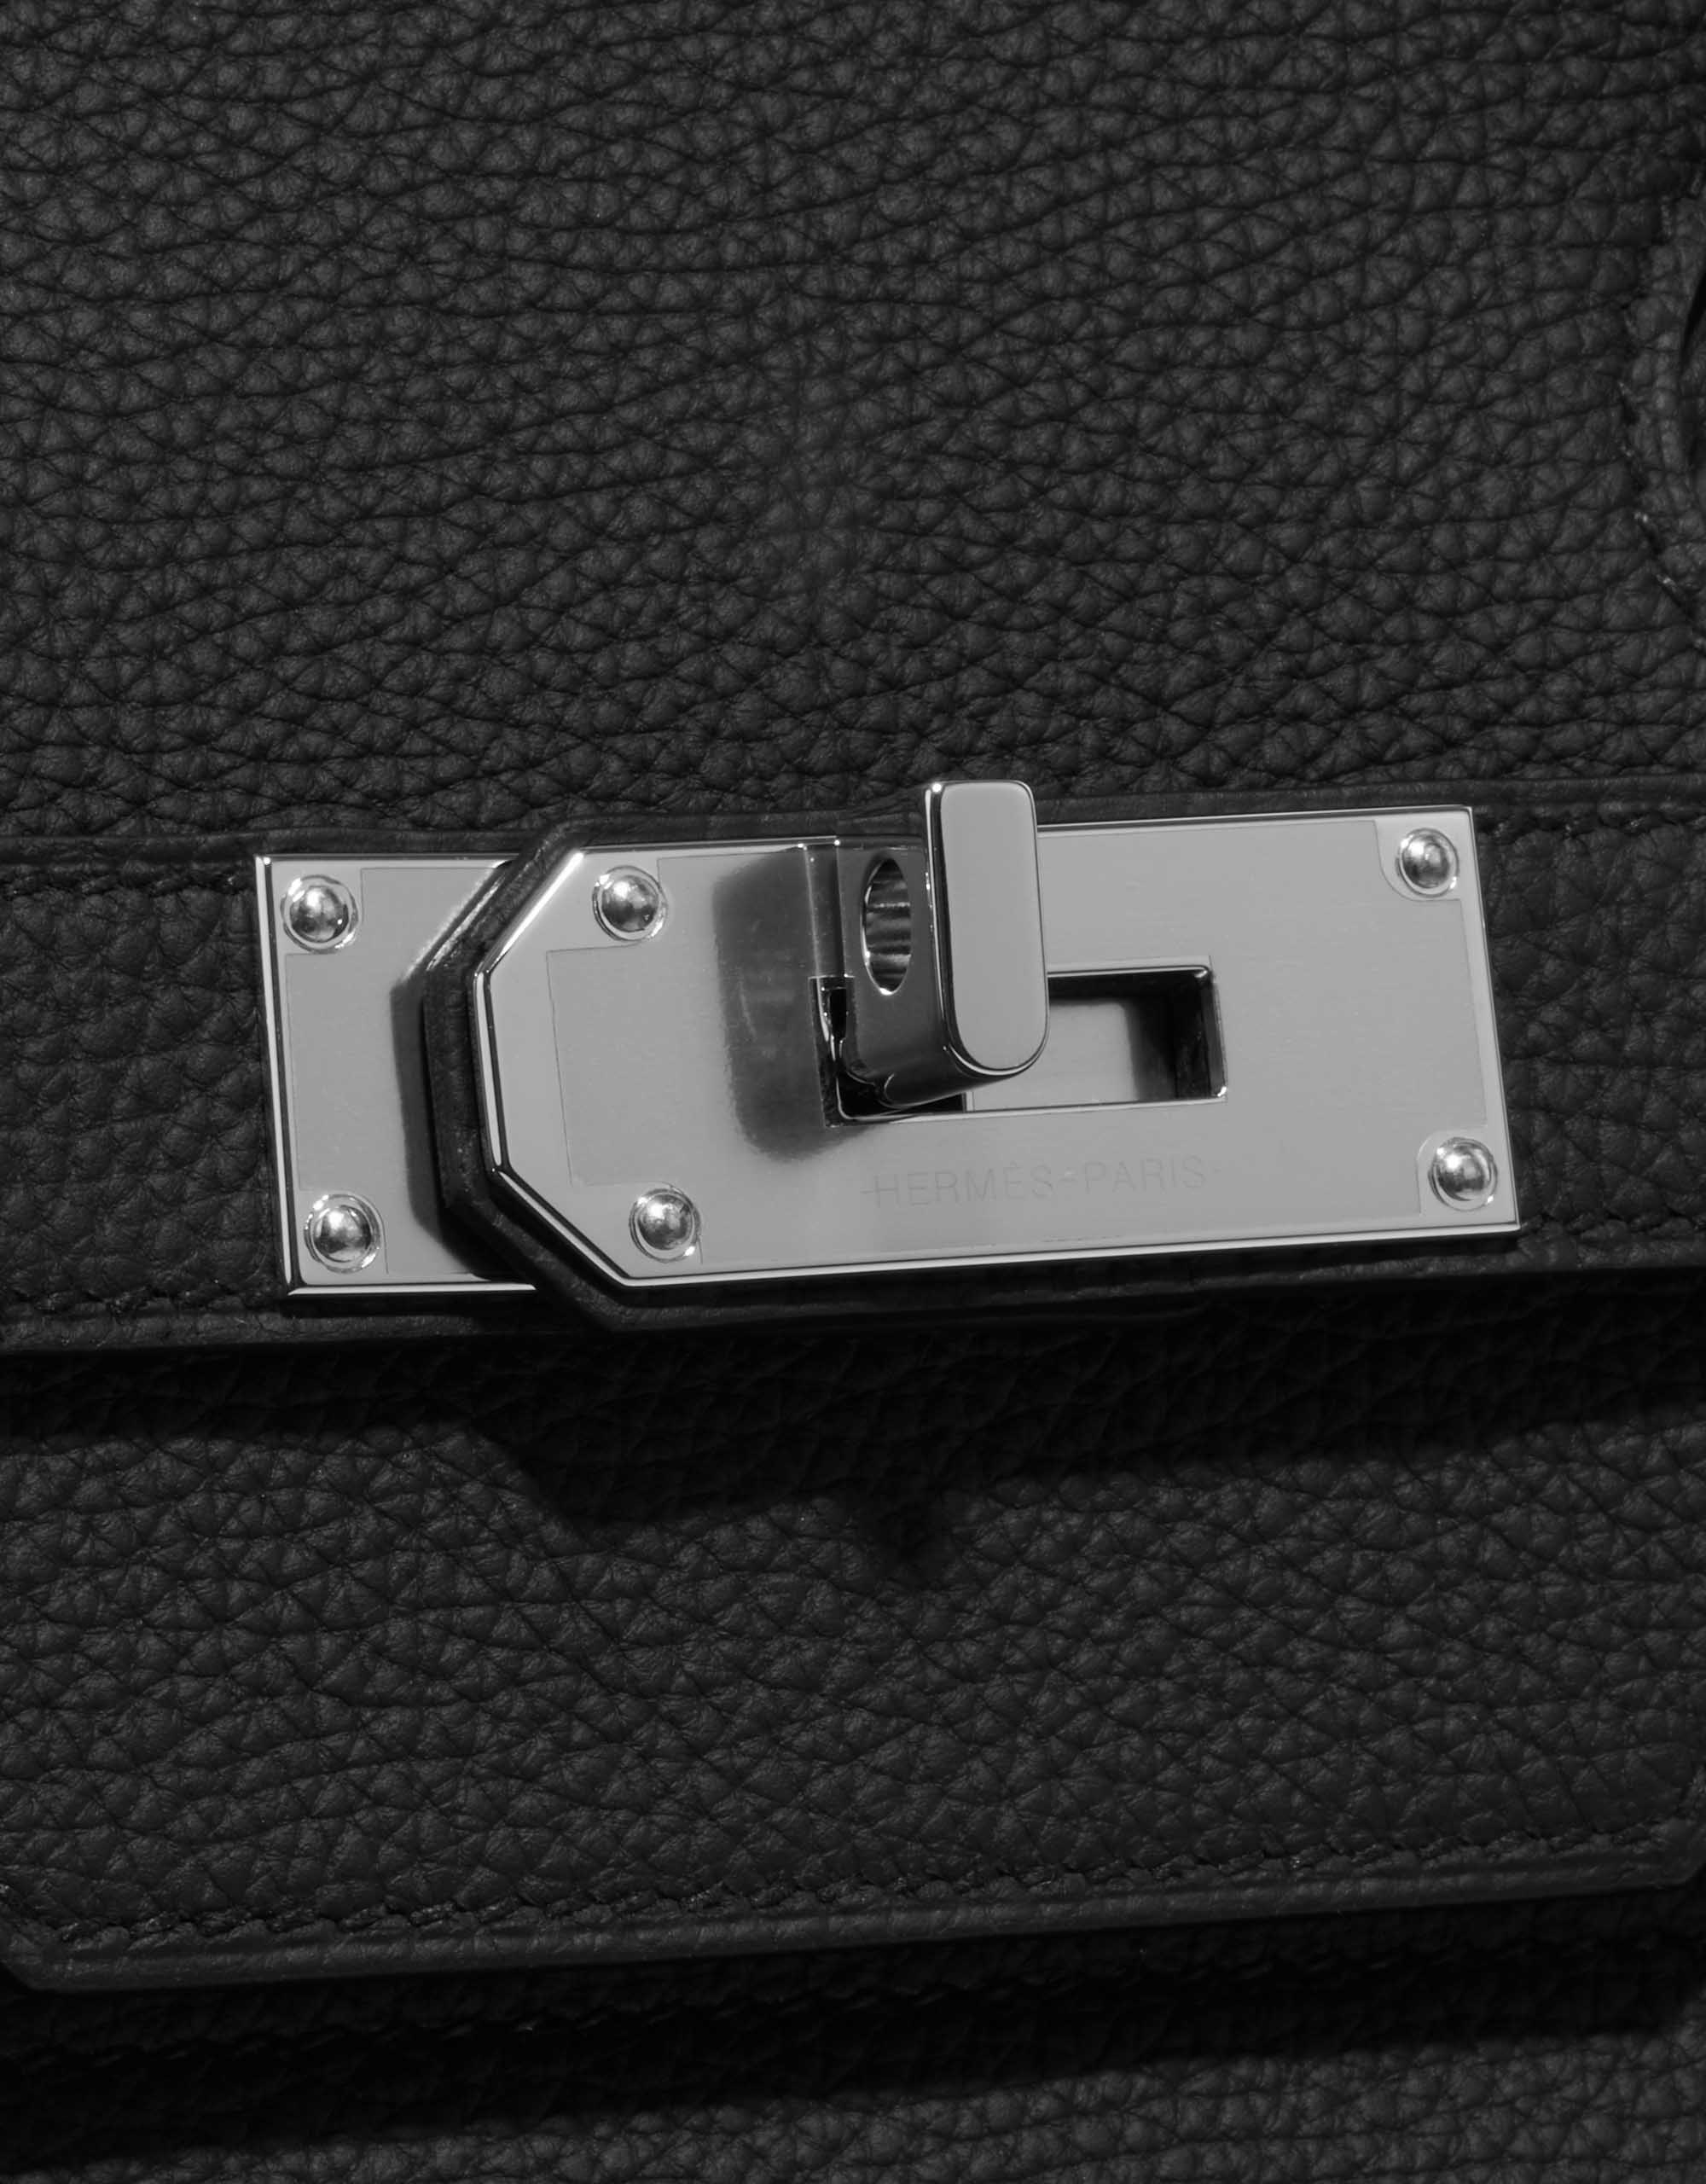 Hermes Haut a Courroies 40 Gold Togo leather Silver hardware